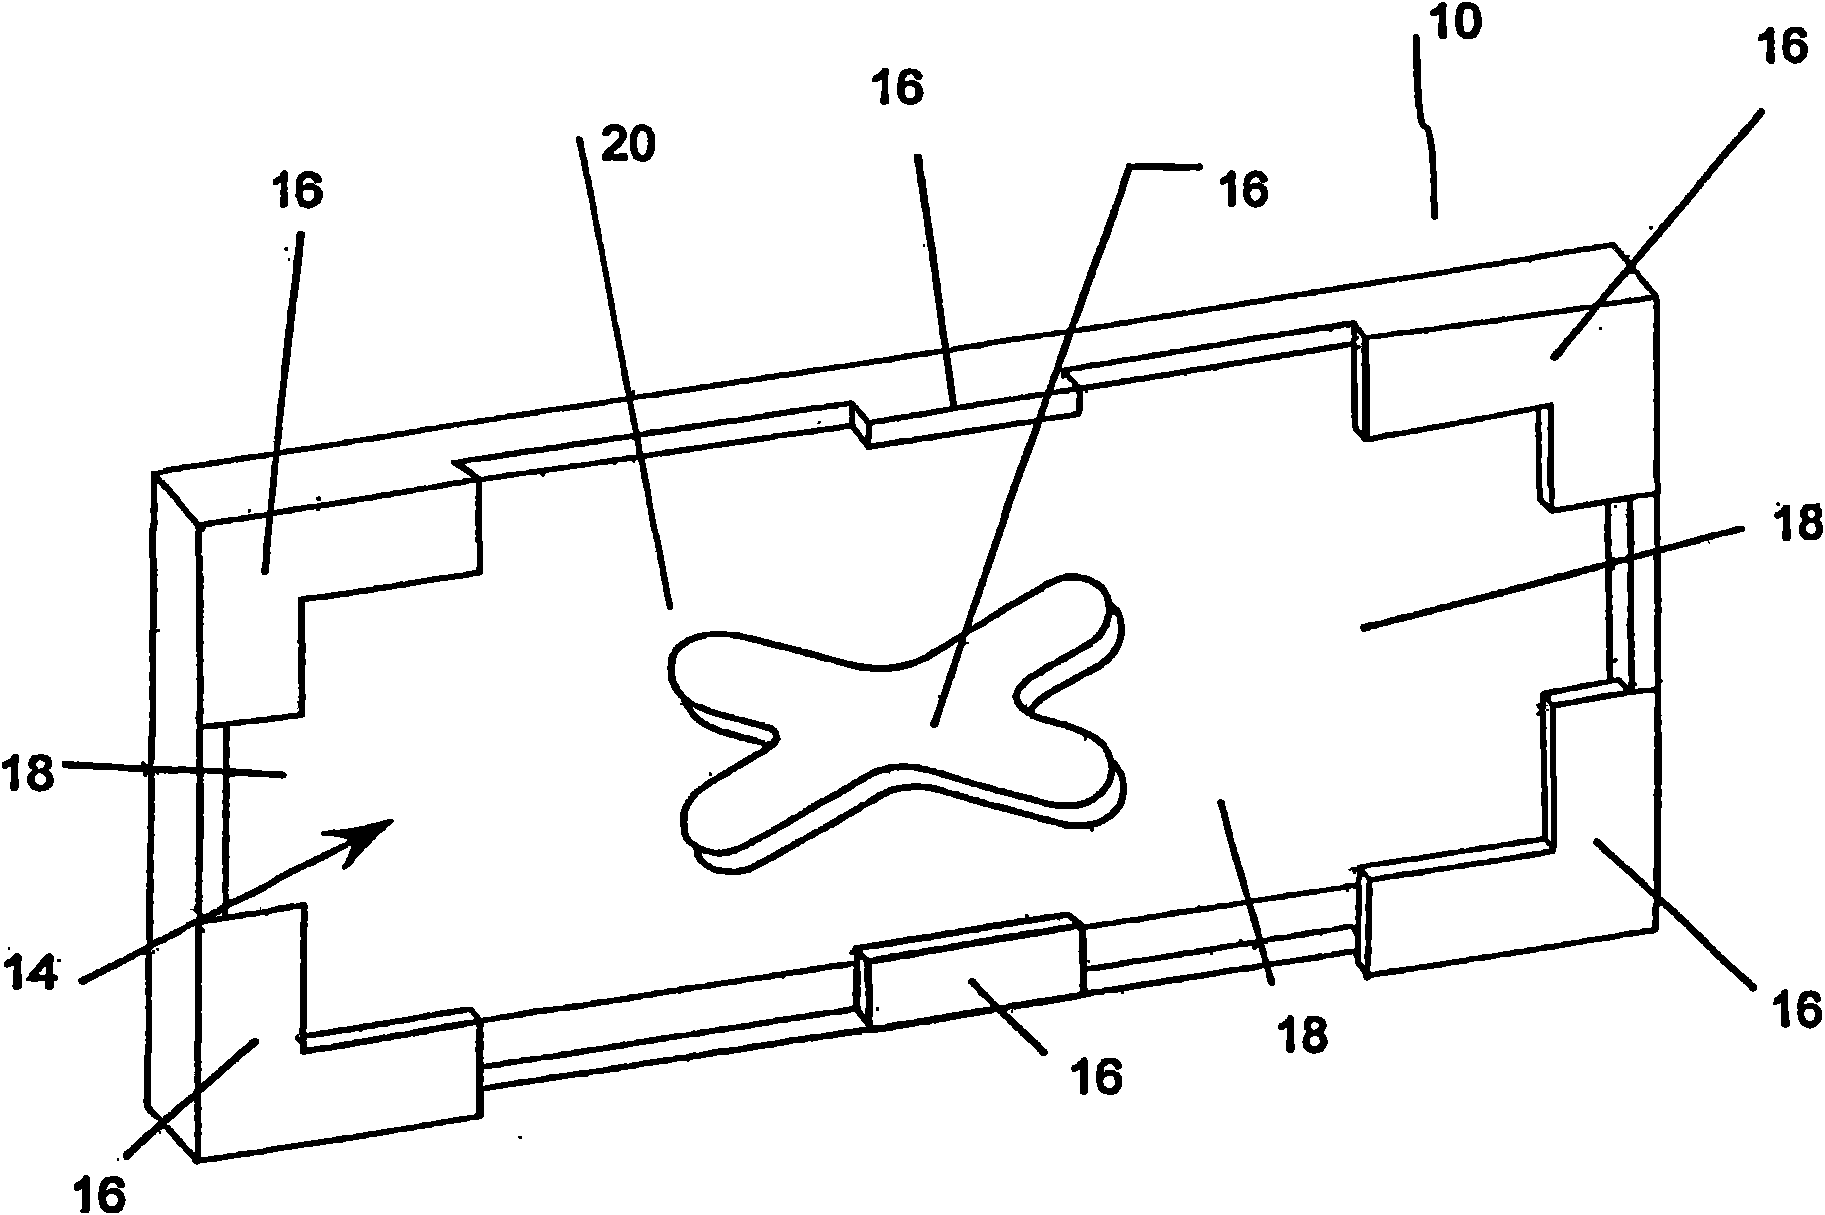 Polymer or composite wall and surface veneering products, systems and methods of use thereof